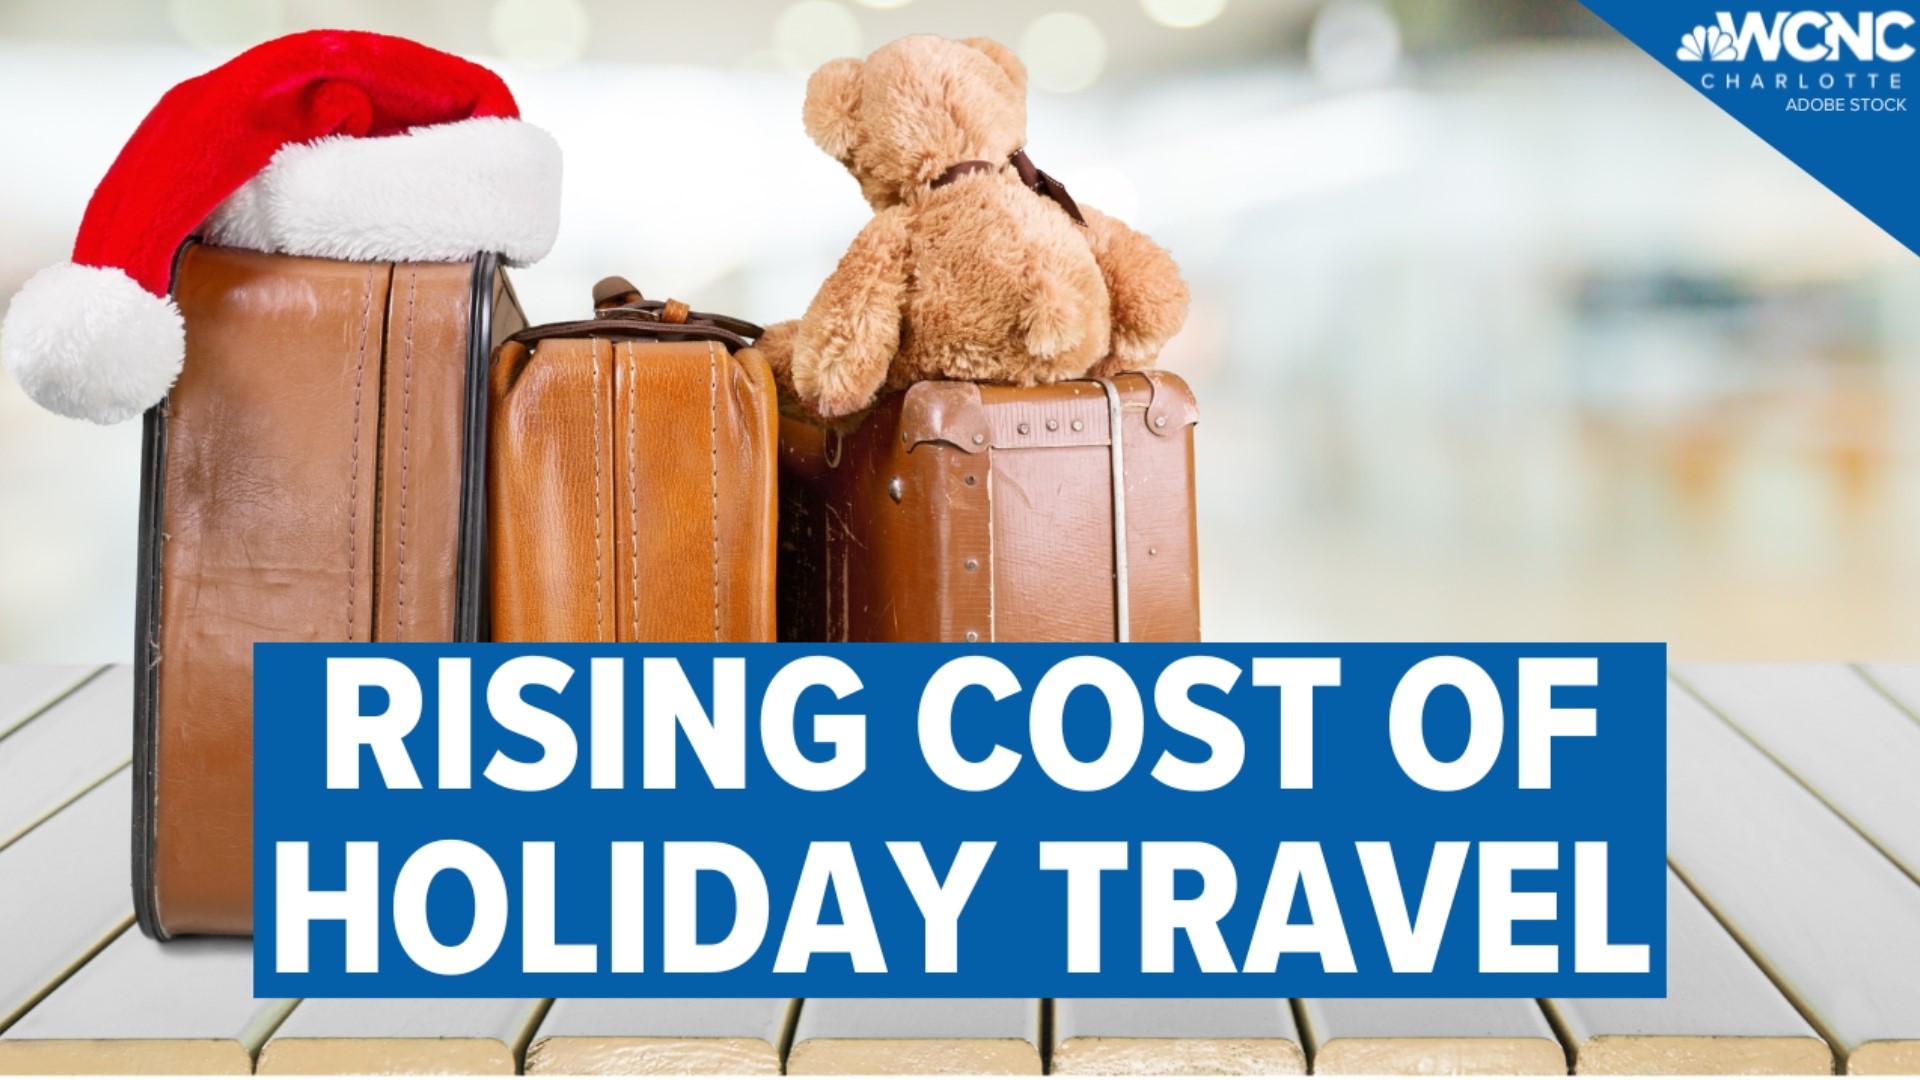 If you still haven't booked your holiday travel plans, be prepared to pay more. Here's how you can still find an affordable flight before it's too late.